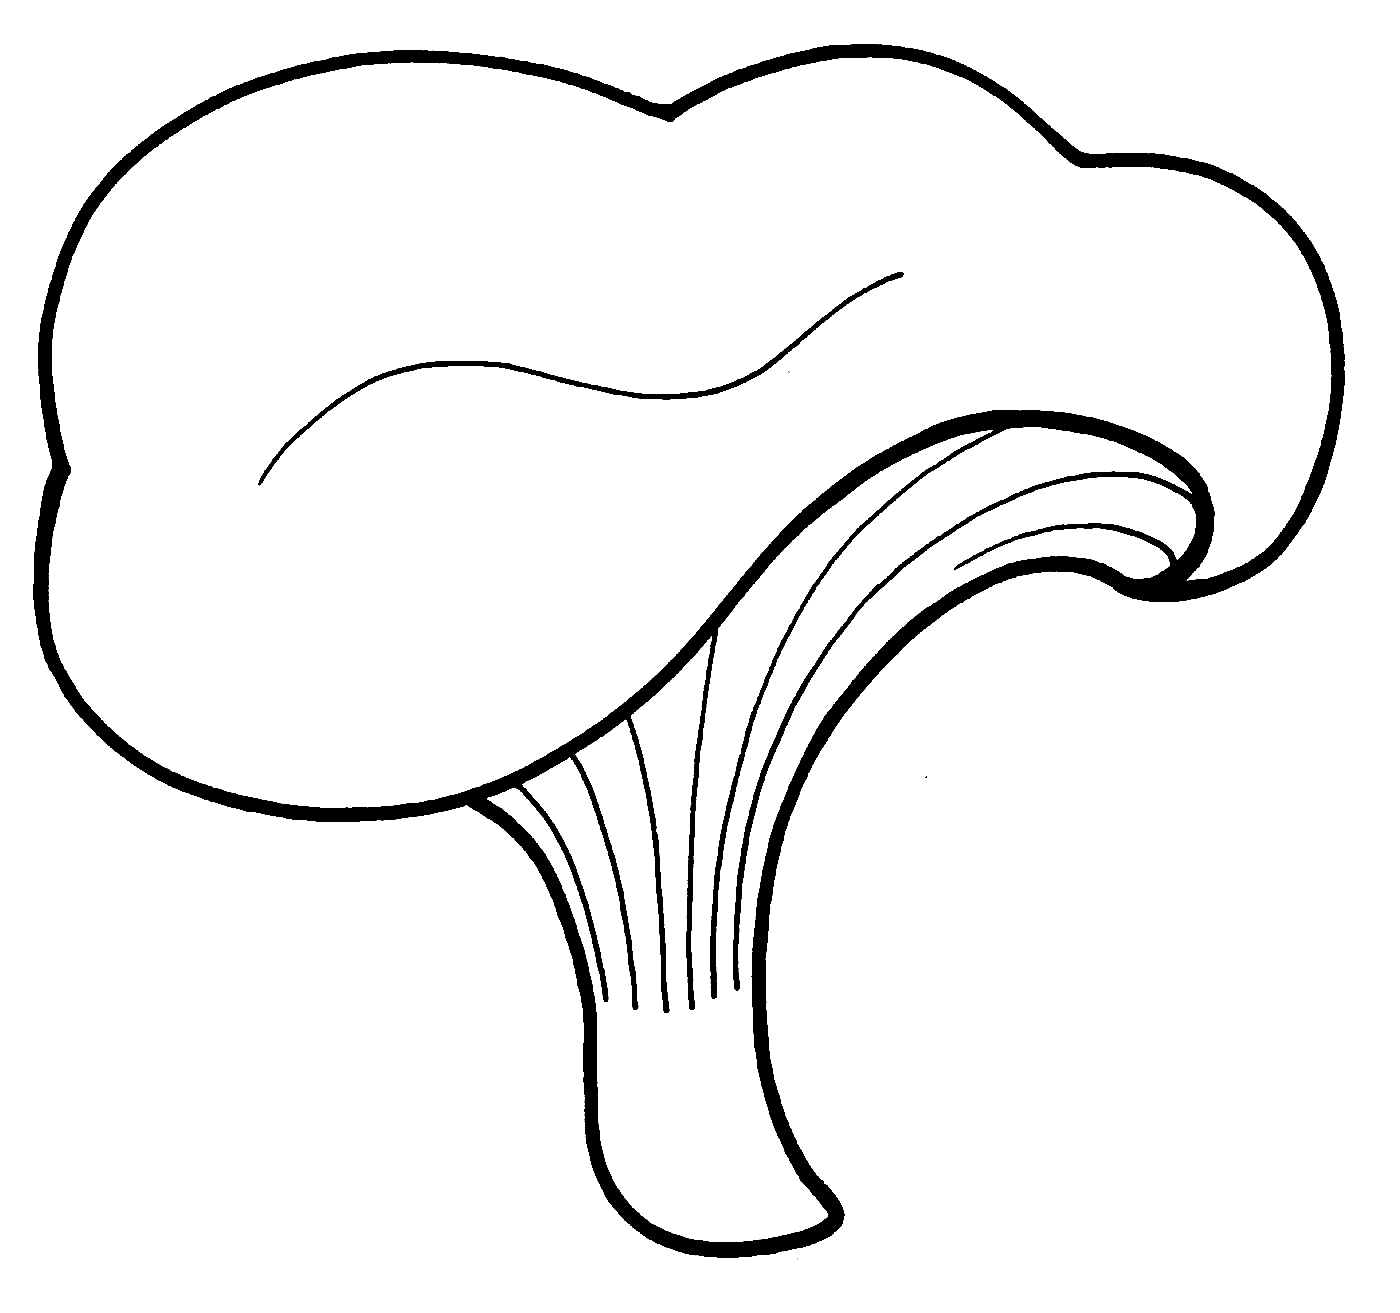 Simple Mushroom for Kids Coloring Page